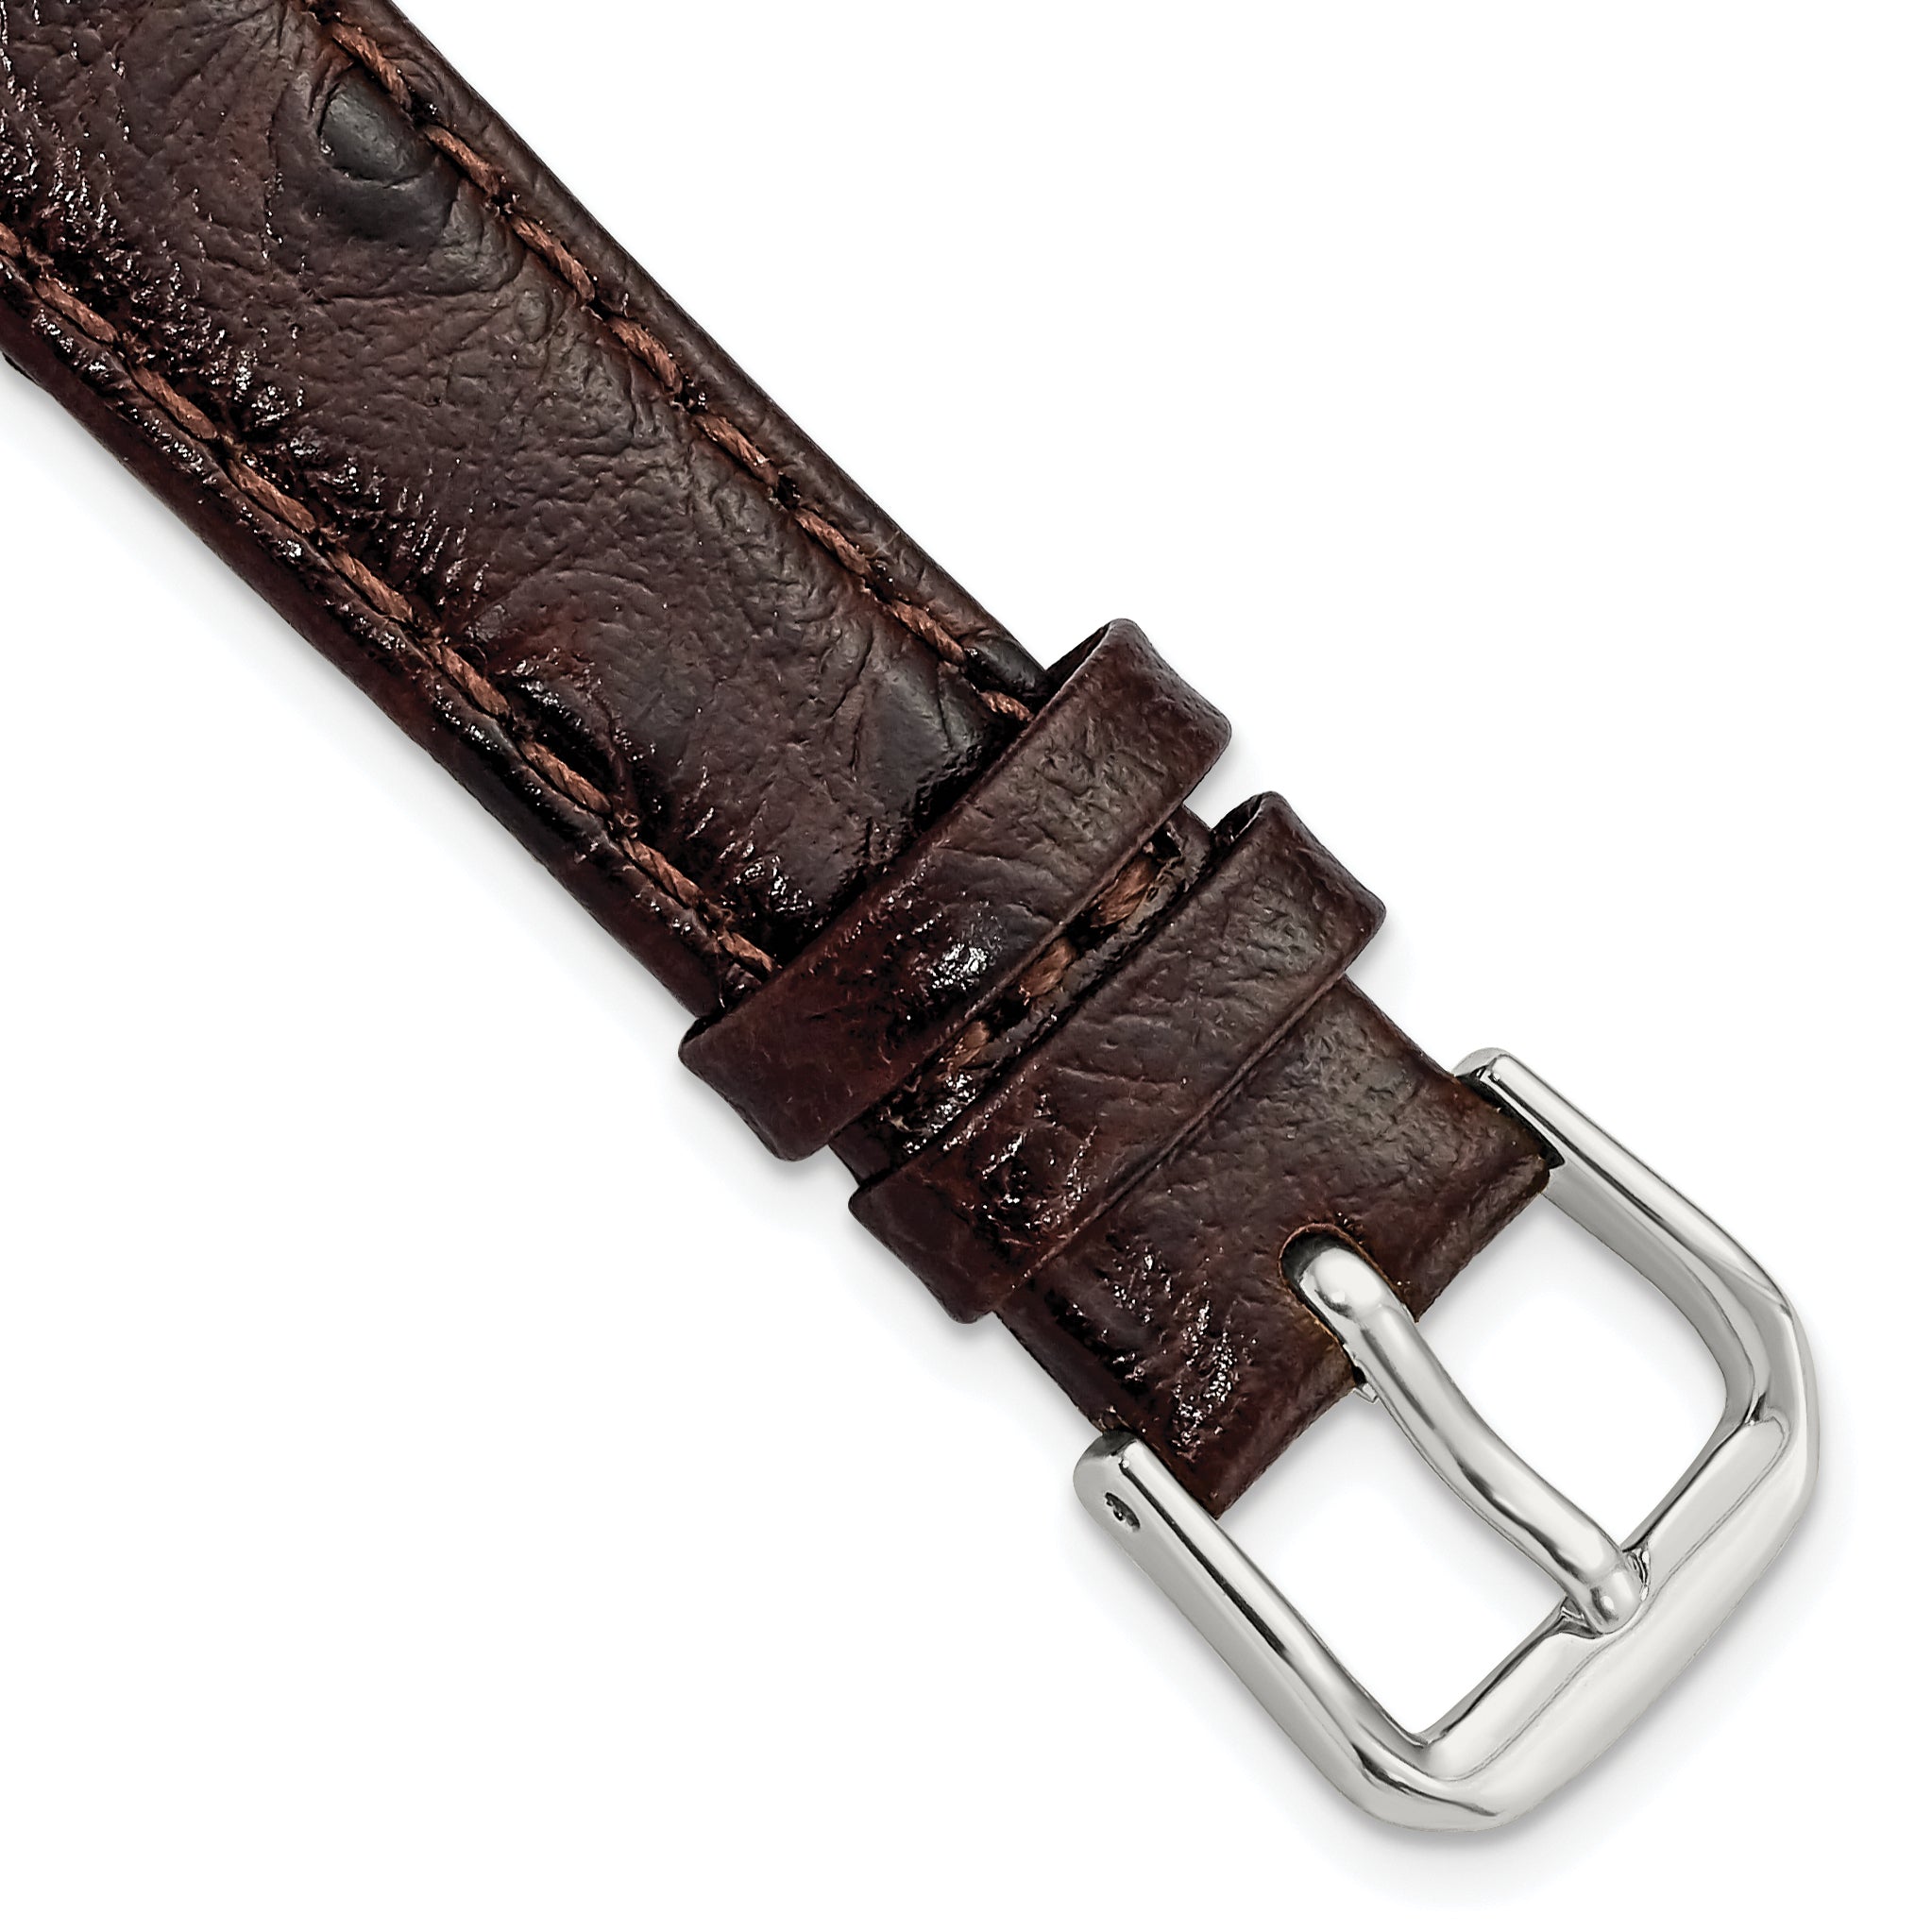 DeBeer 14mm Brown Ostrich Grain Leather with Silver-tone Buckle 6.75 inch Watch Band